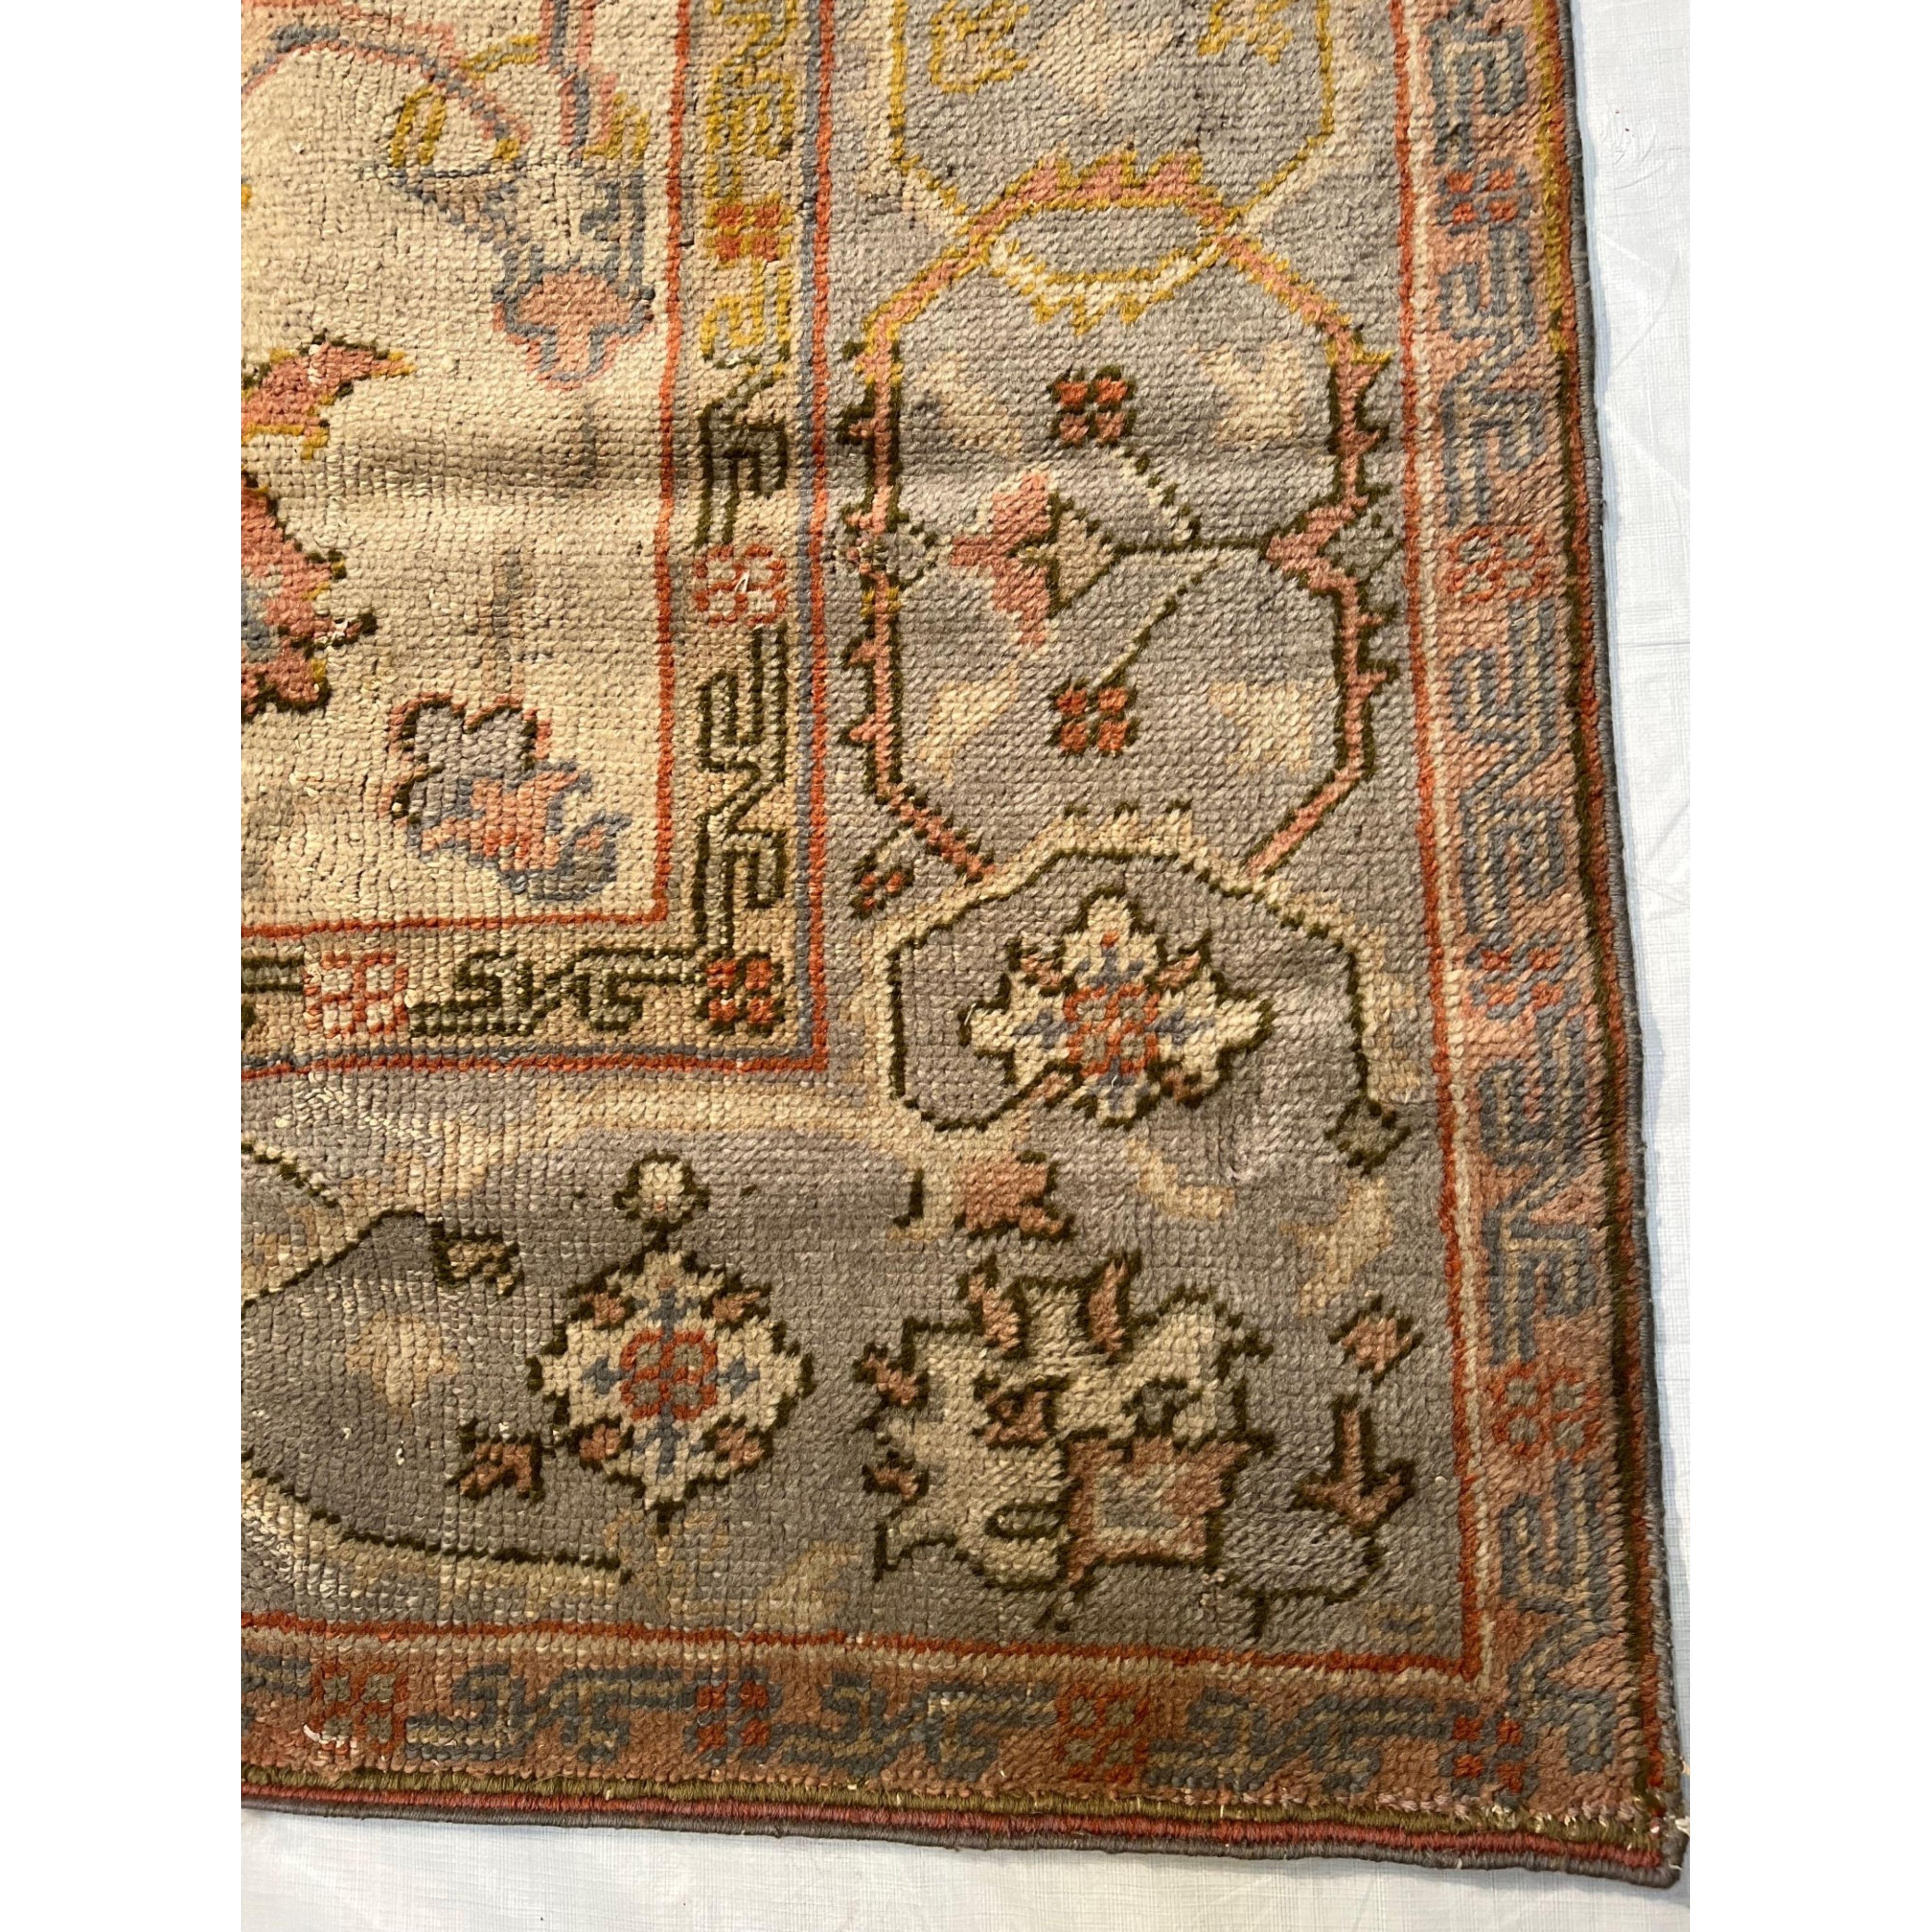 Other Antique Oushak Rug 11.3x8.2 For Sale